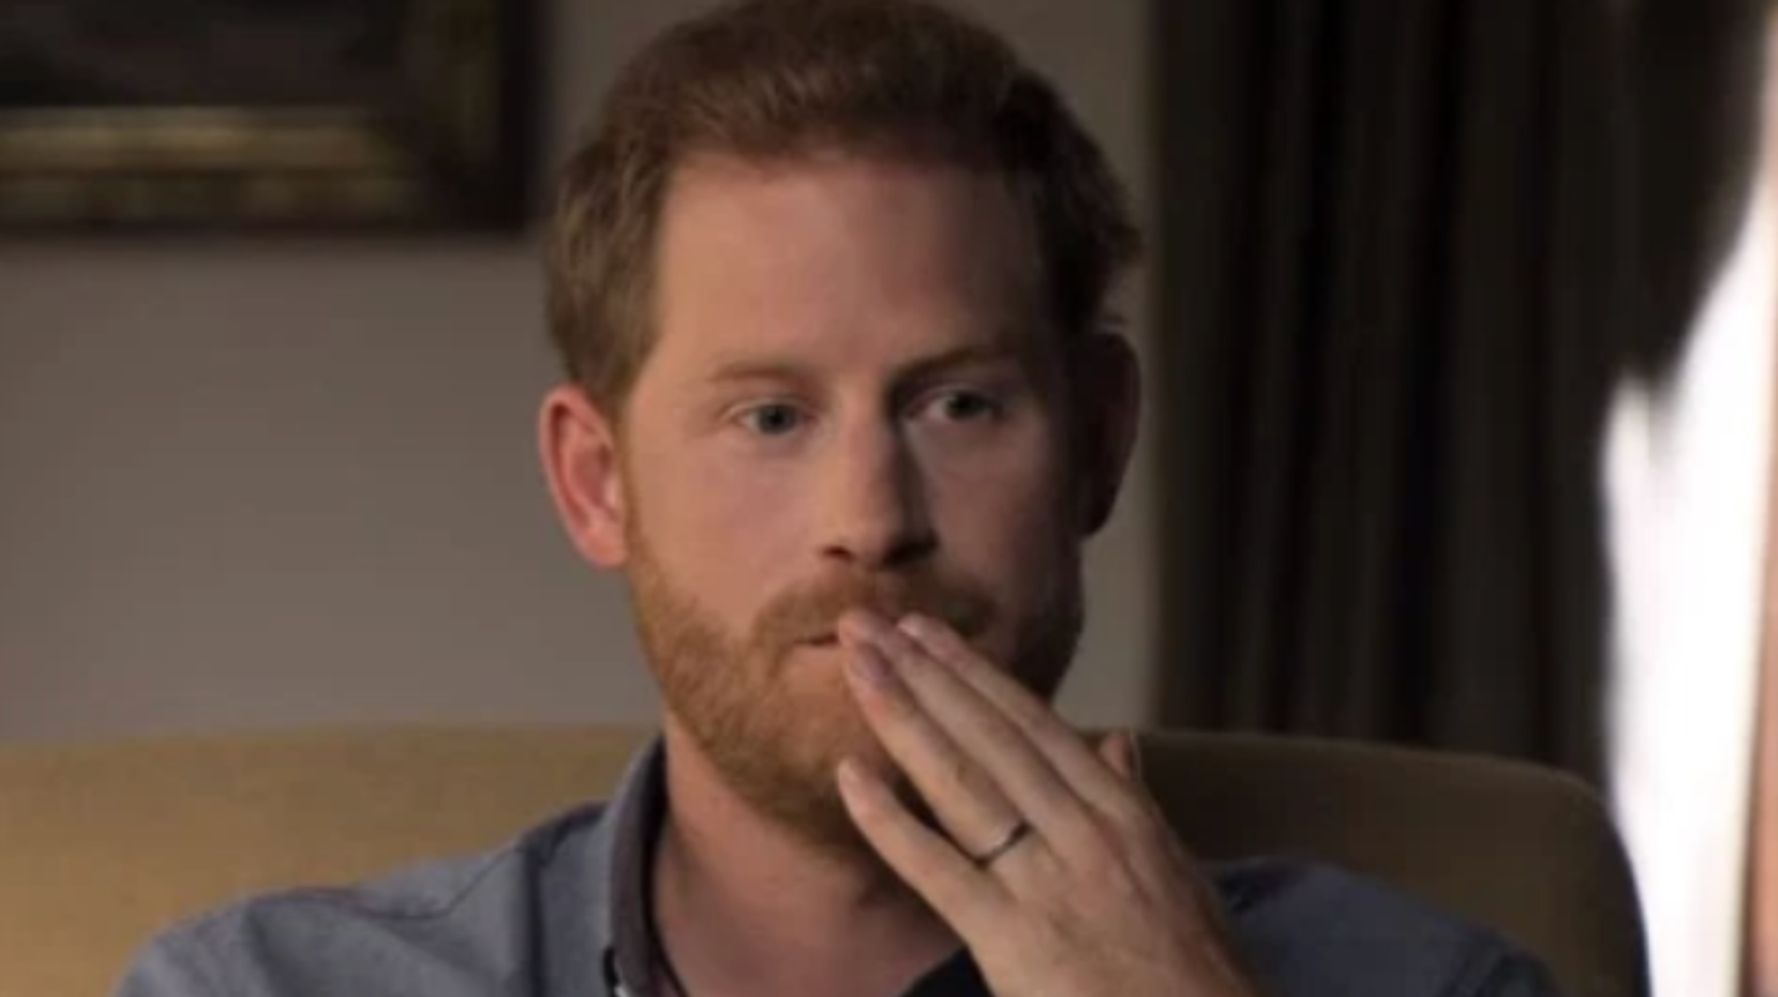 Prince Harry Reveals He Used Drink And Drugs To Cope With Trauma Of Princess Diana’s Death